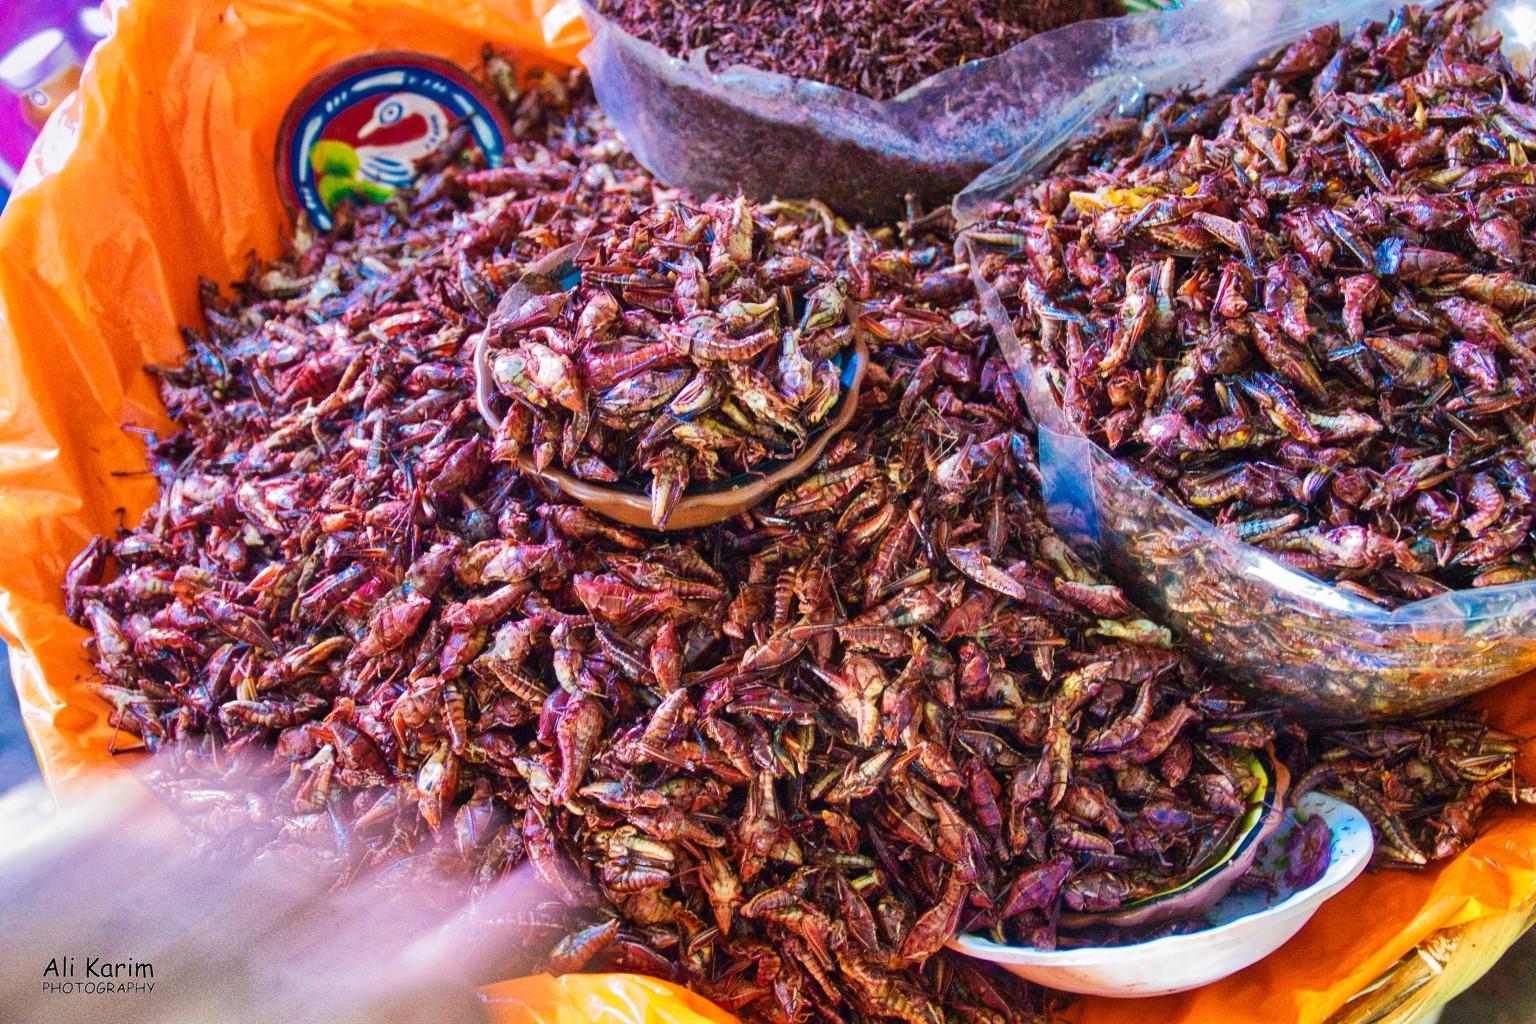 Oaxaca, Mexico One specialty of this area is fried grasshopper and fried worms (in the back). They fry these with spices, so they are very tasty to snack on, with beer :)